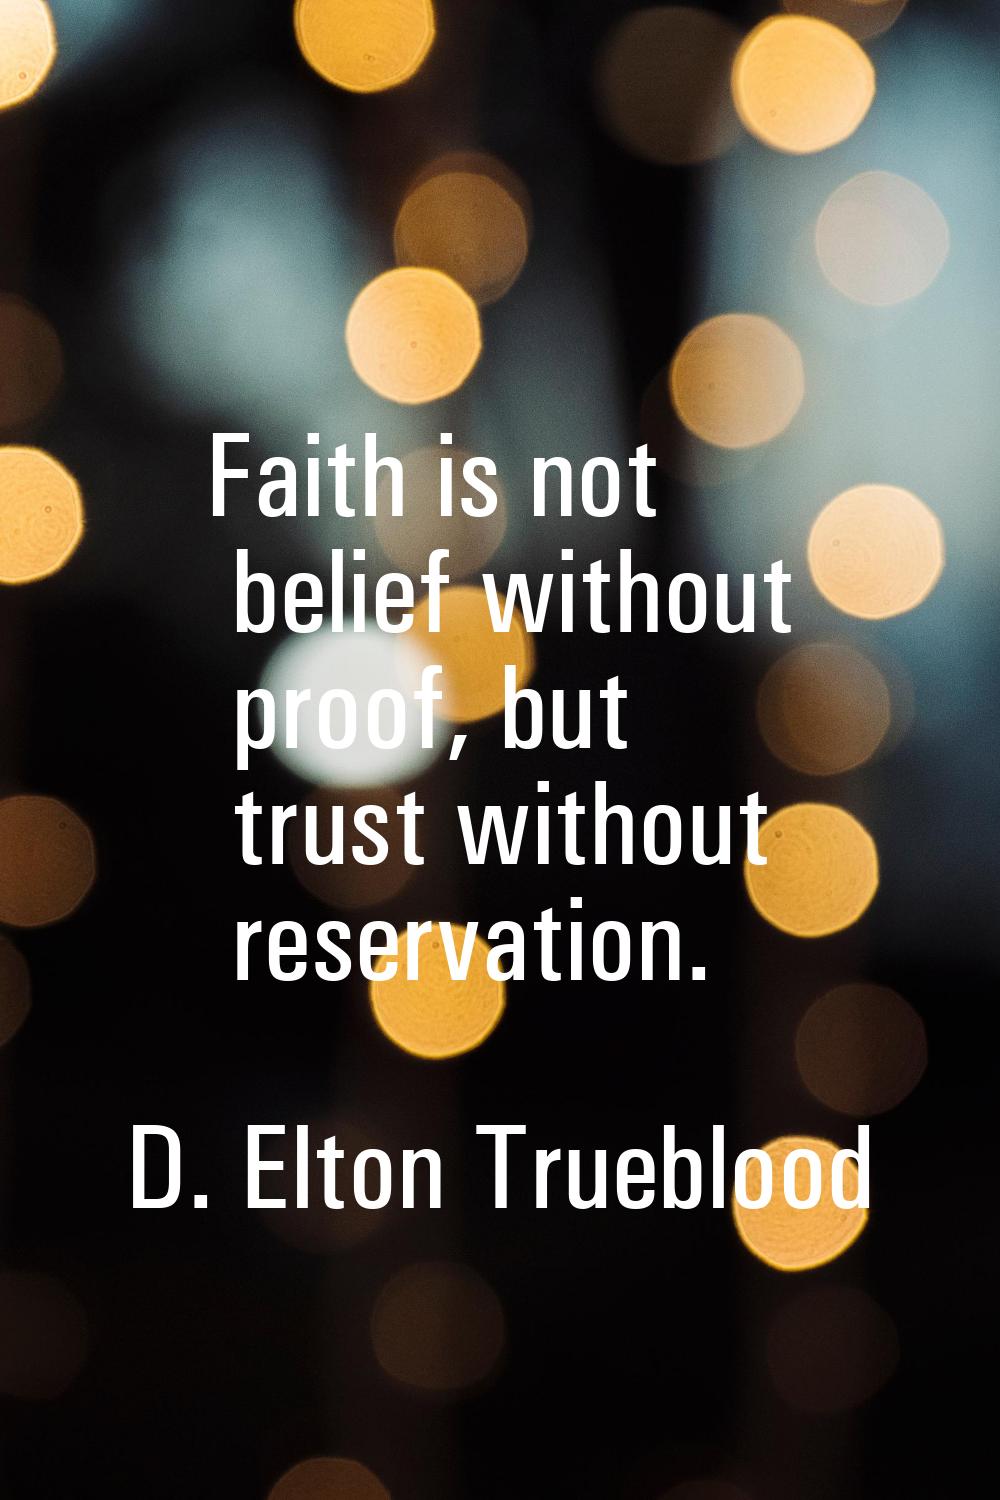 Faith is not belief without proof, but trust without reservation.